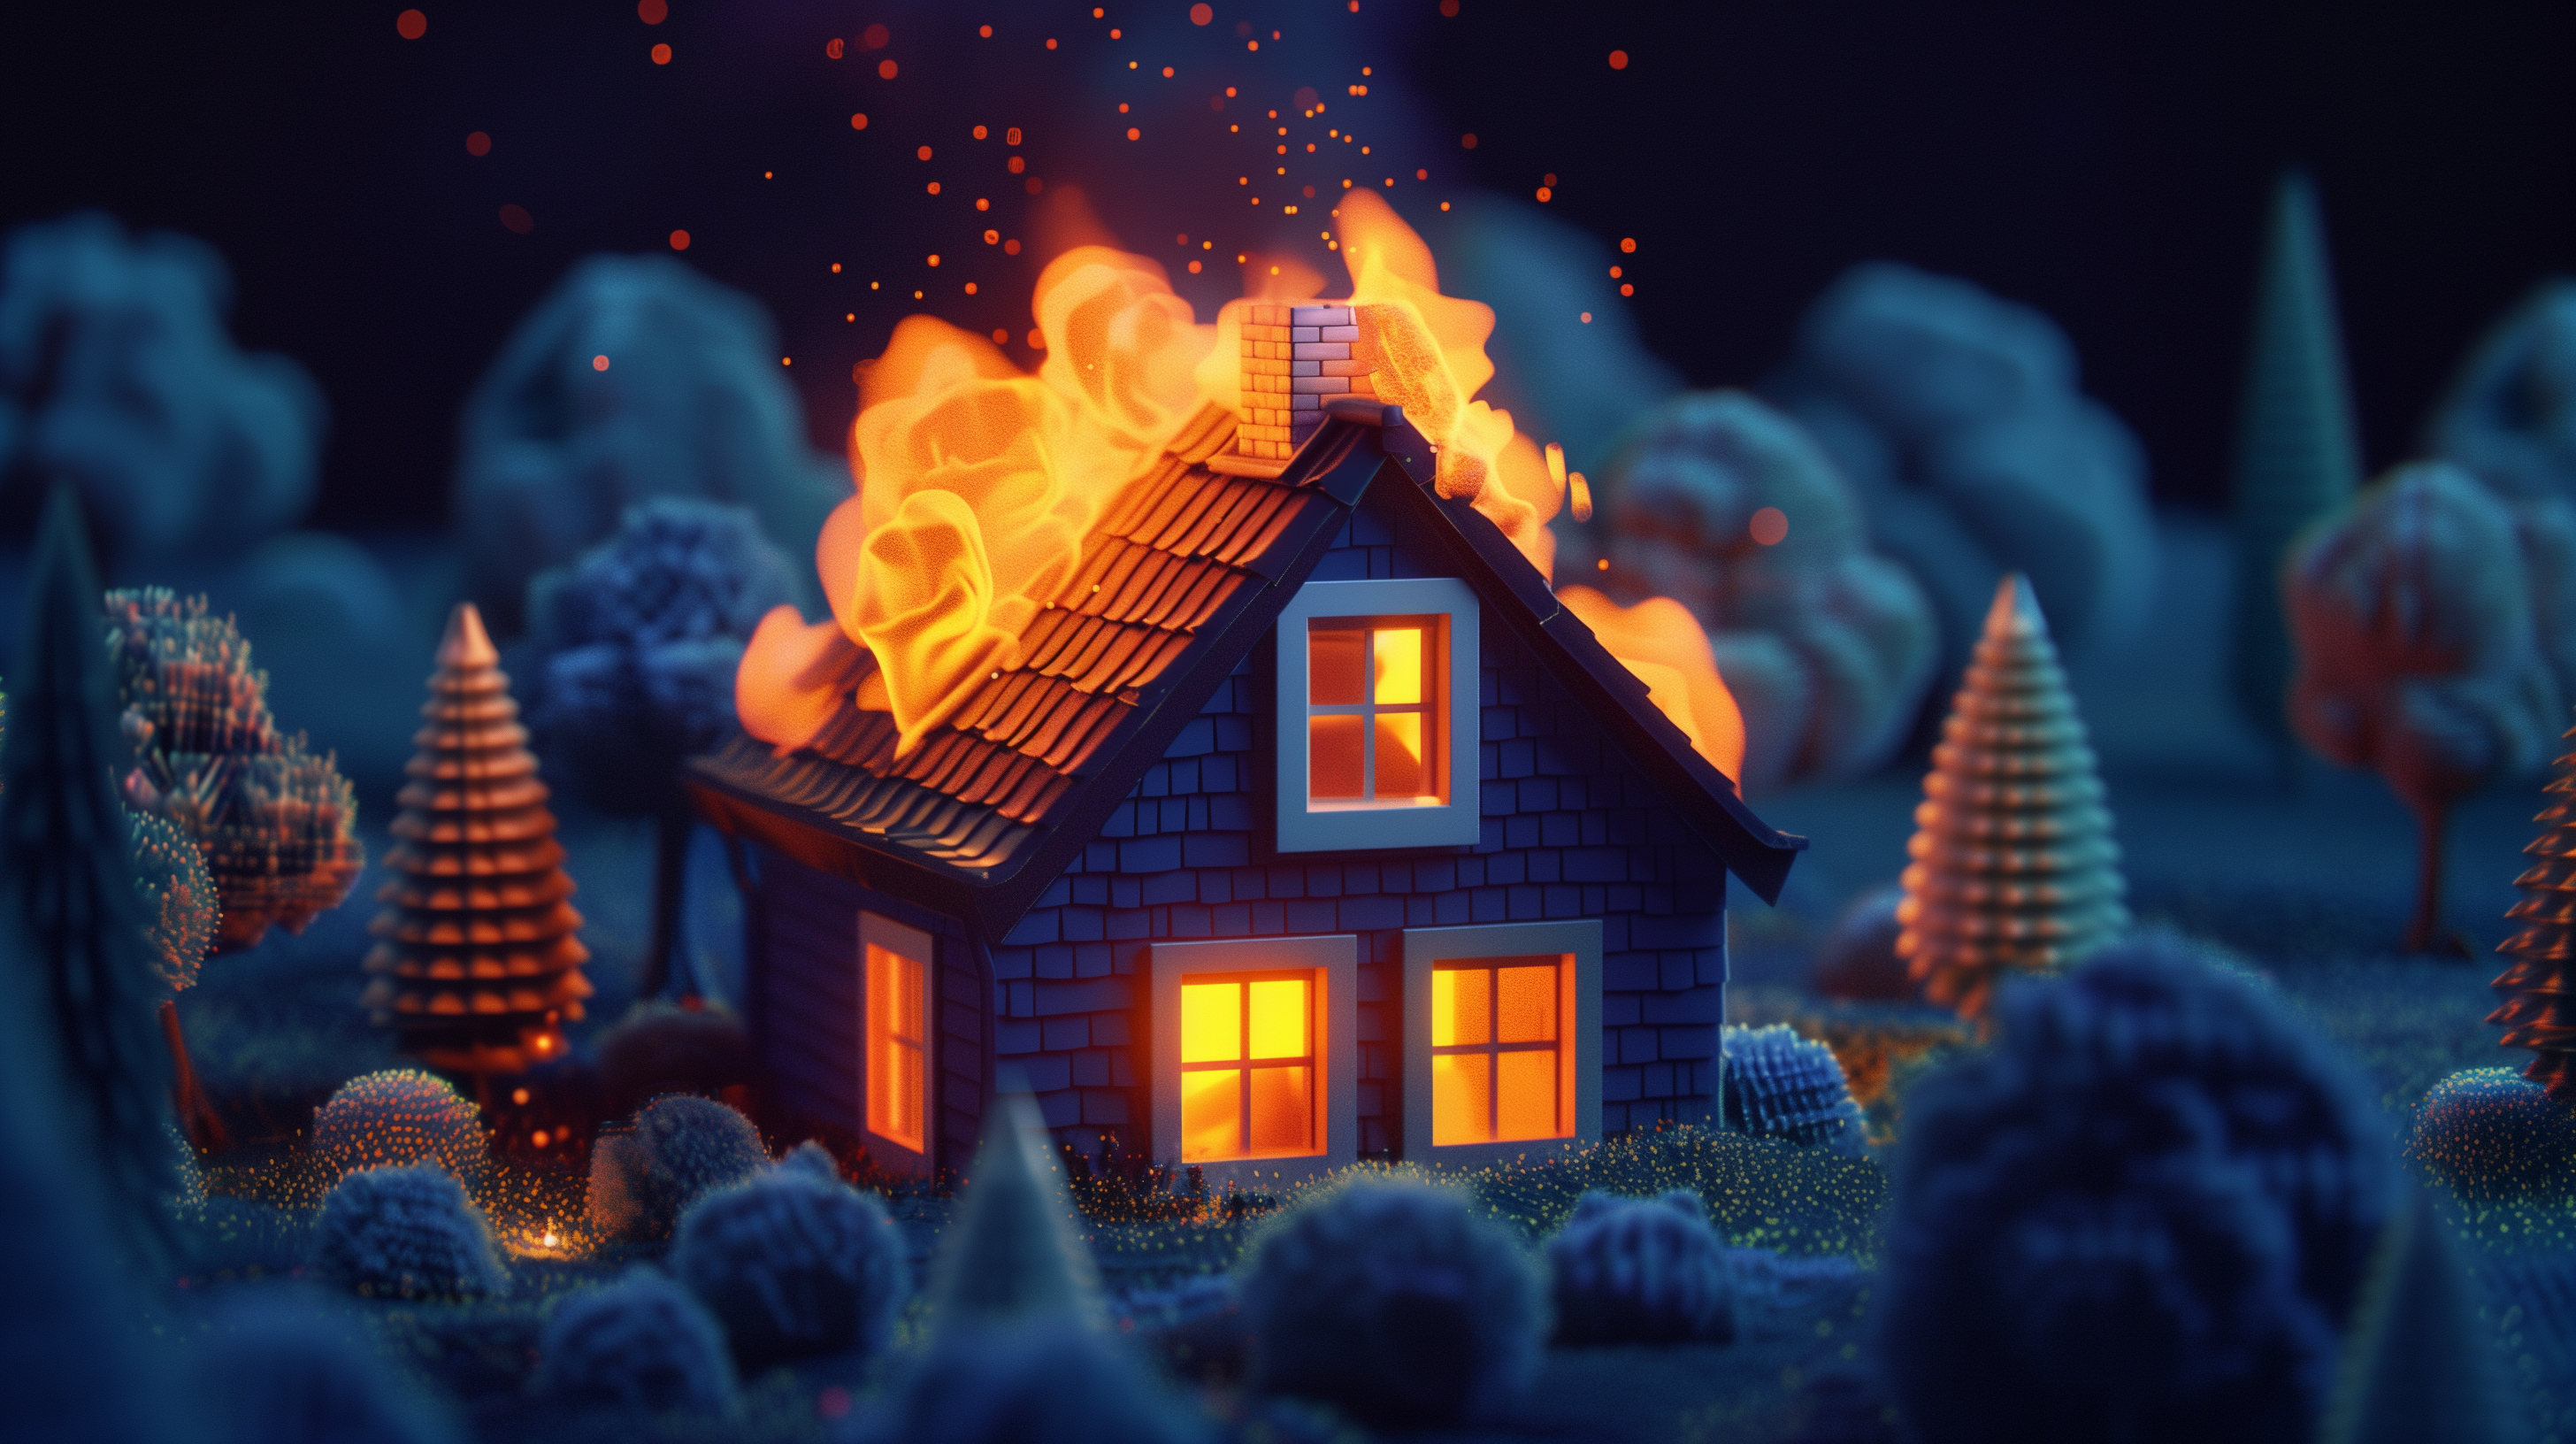 Isometric illustration of a burning house surrounded by trees, designed as an HD desktop wallpaper and background.